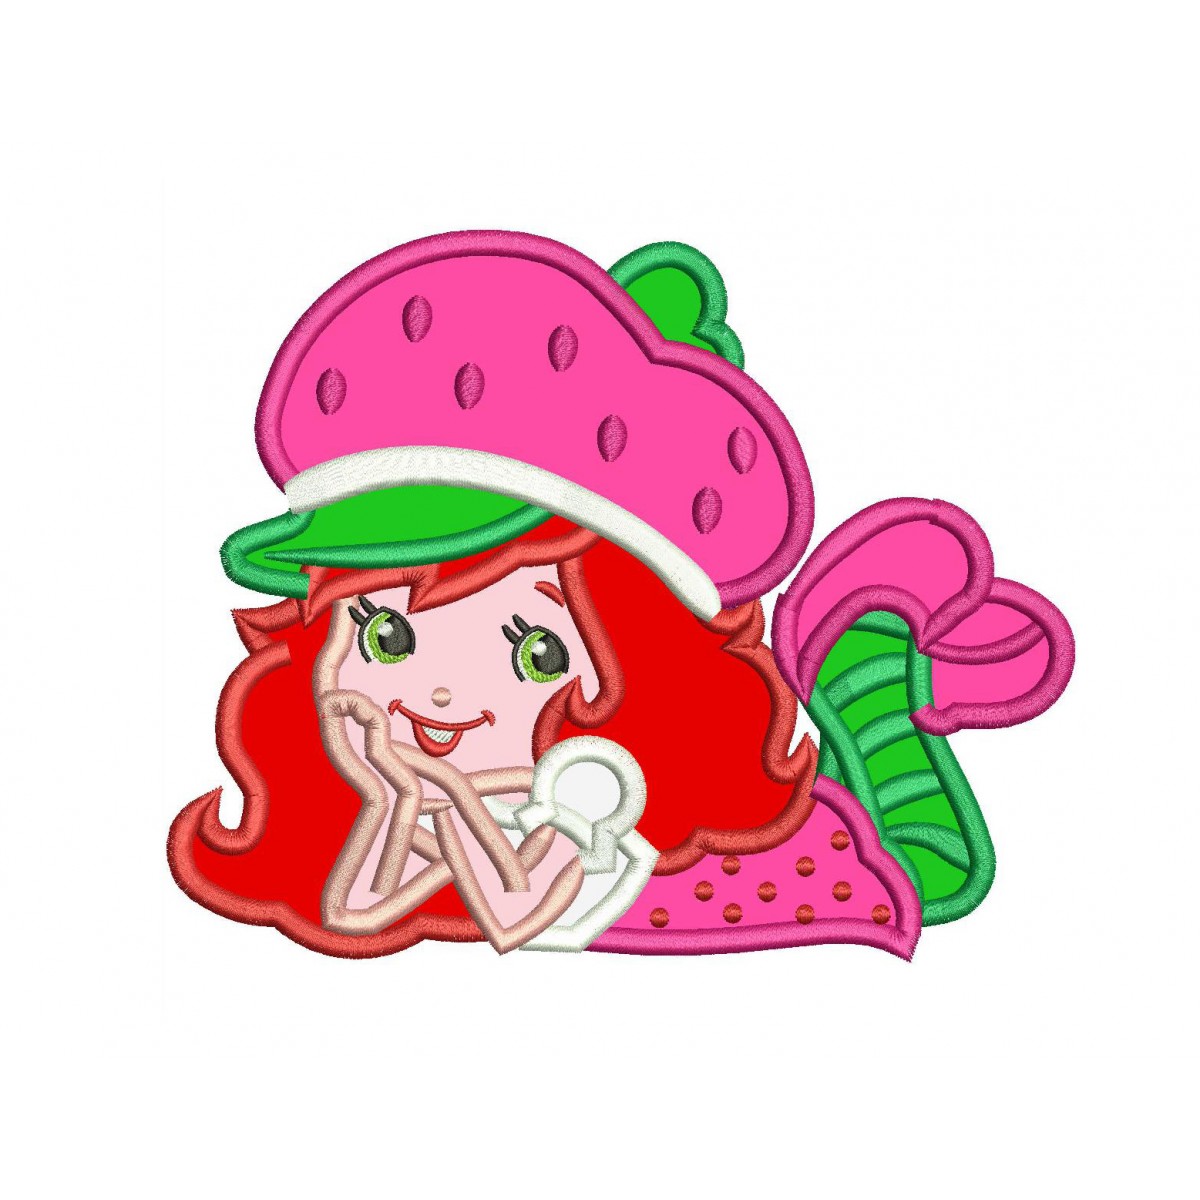 Strawberry Box Applique Design For Machine Embroidery Size 5x5 4x4 & 6x6 INSTANT DOWNLOAD now available doll shirt s 2.5